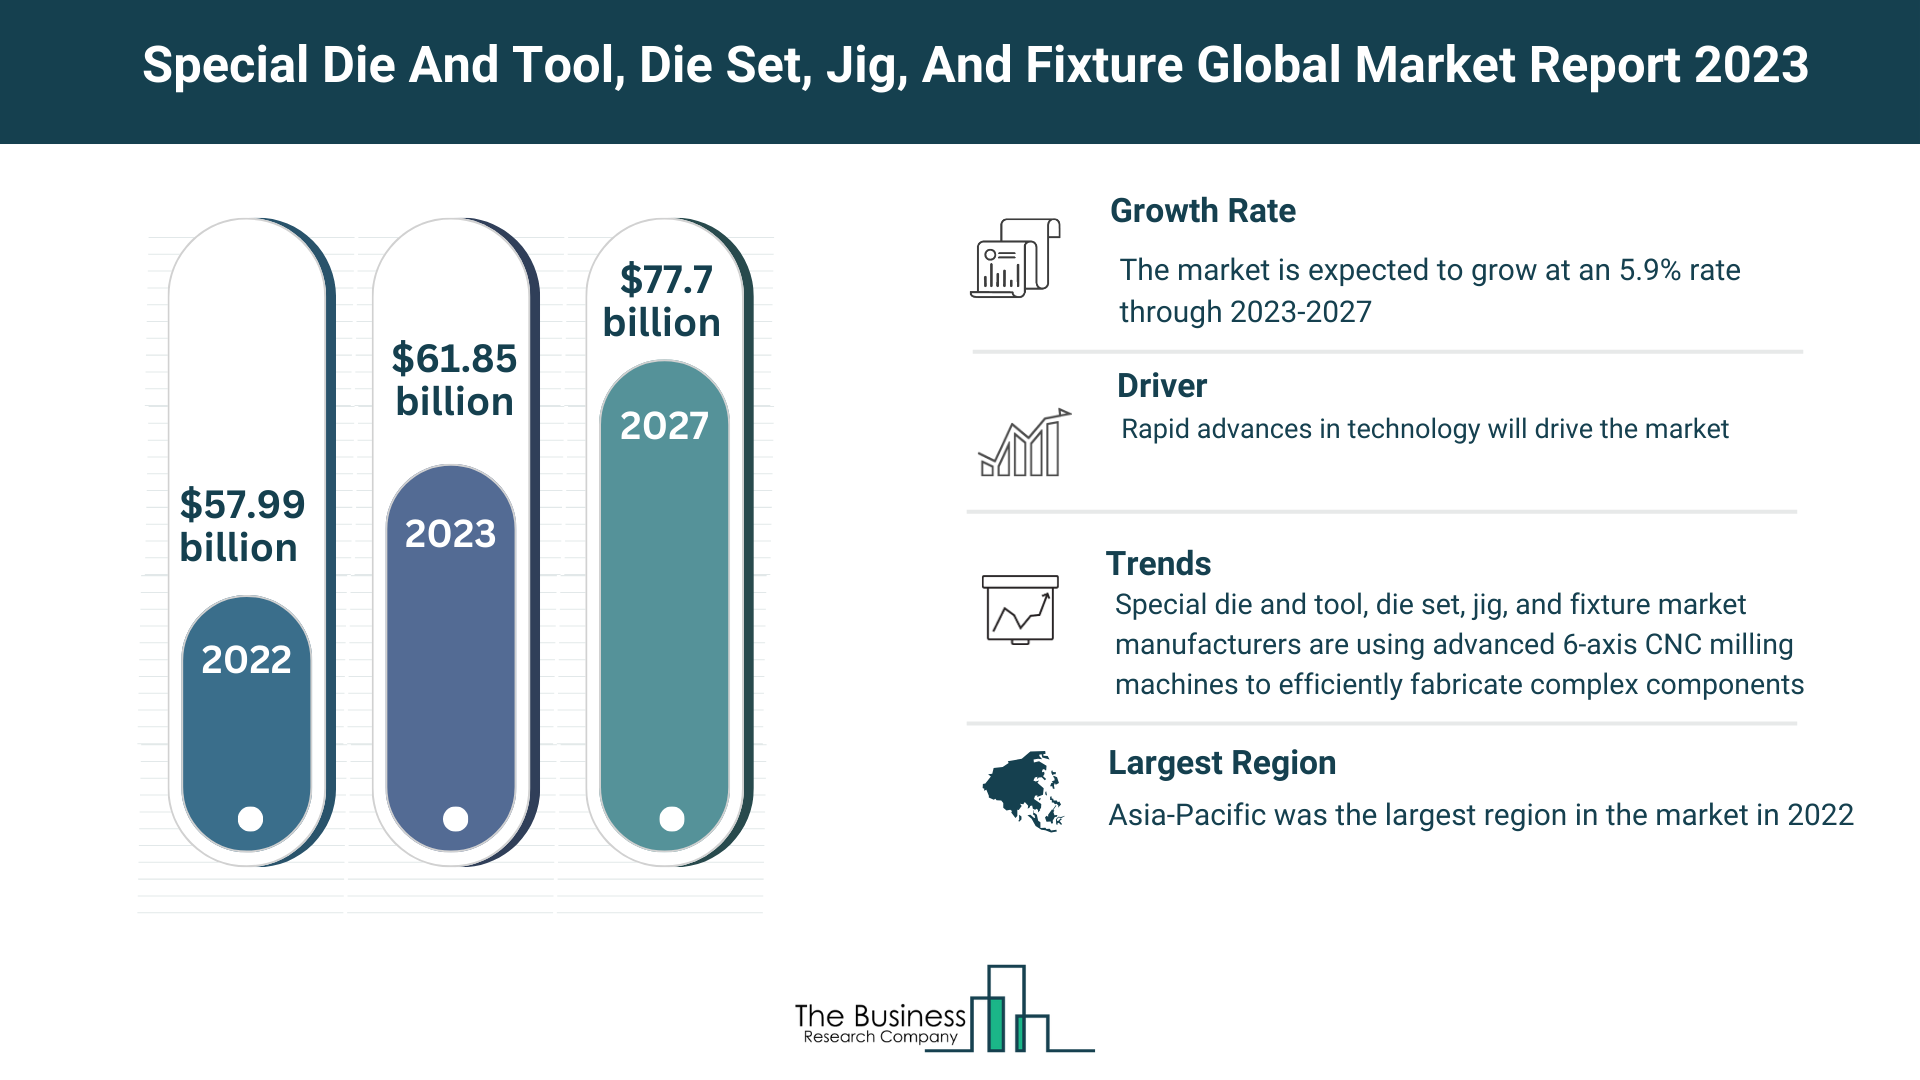 Global Special Die And Tool, Die Set, Jig, And Fixture Market Analysis: Size, Drivers, Trends, Opportunities And Strategies